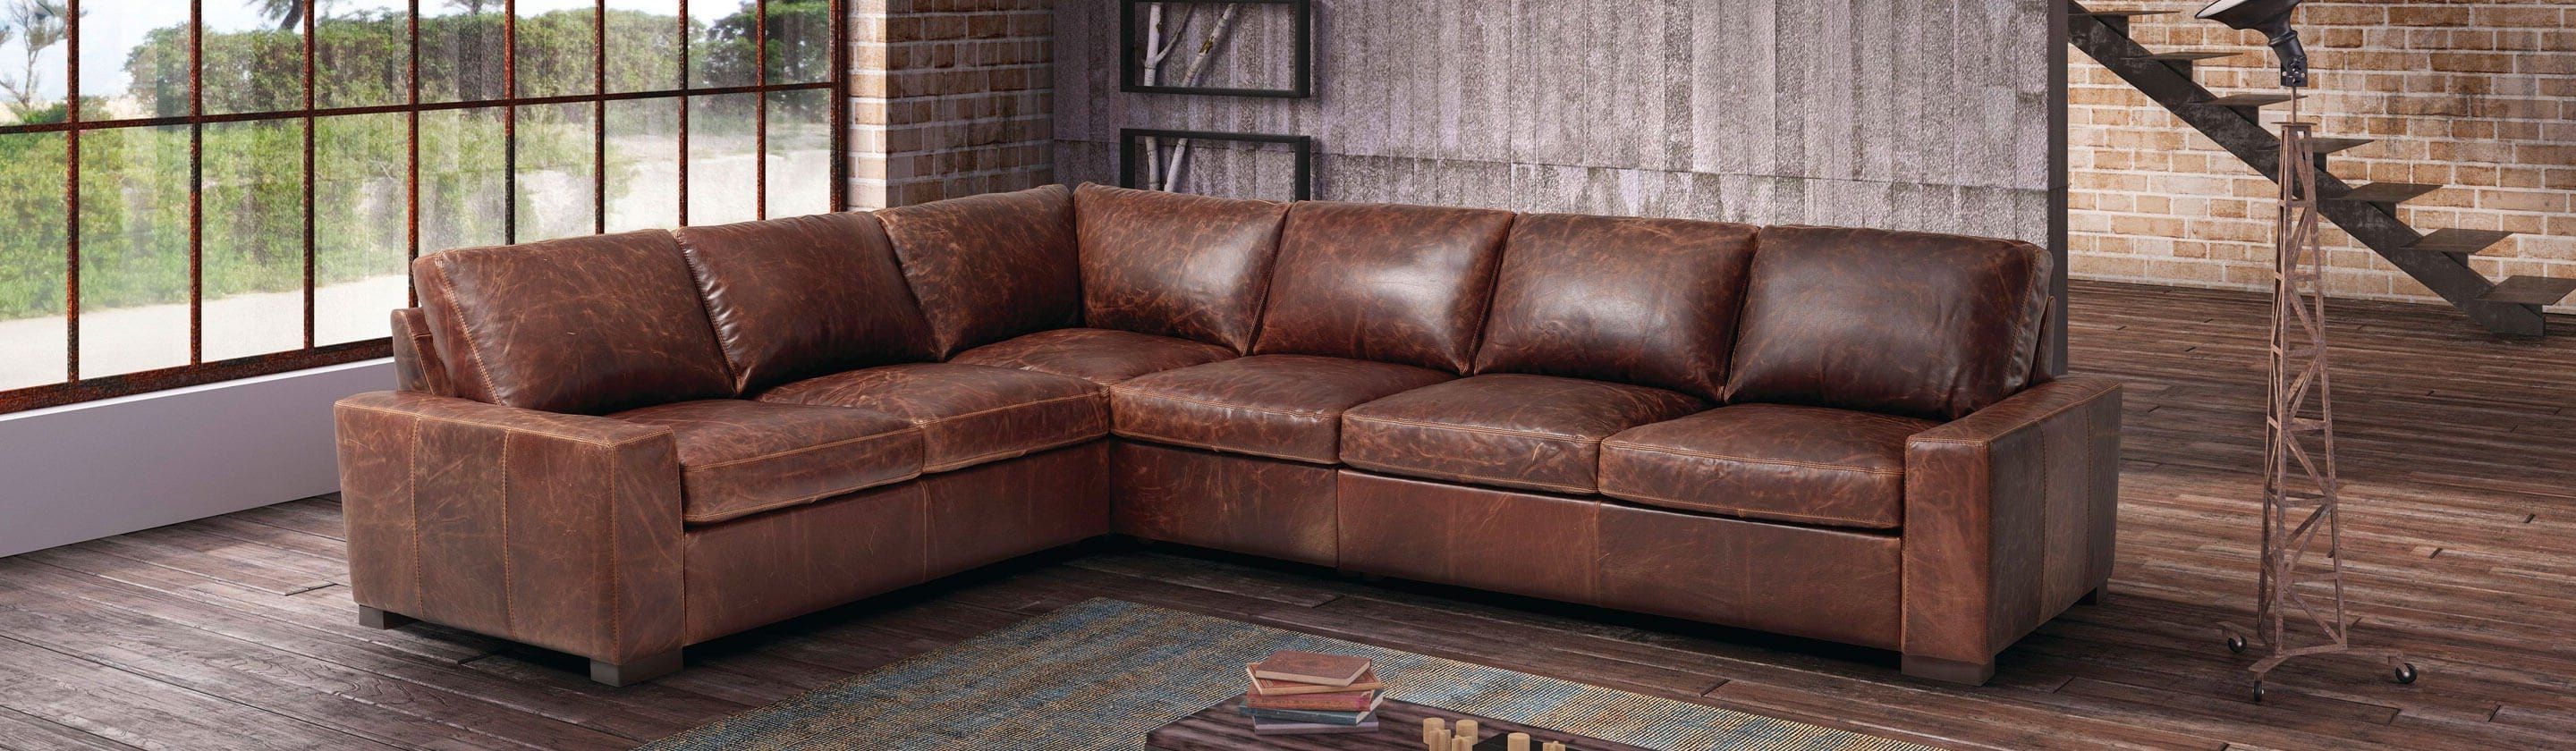 Sectional Sofas & Couches | Living Room Sectionals Intended For Sectional Couches For Living Room (View 17 of 20)